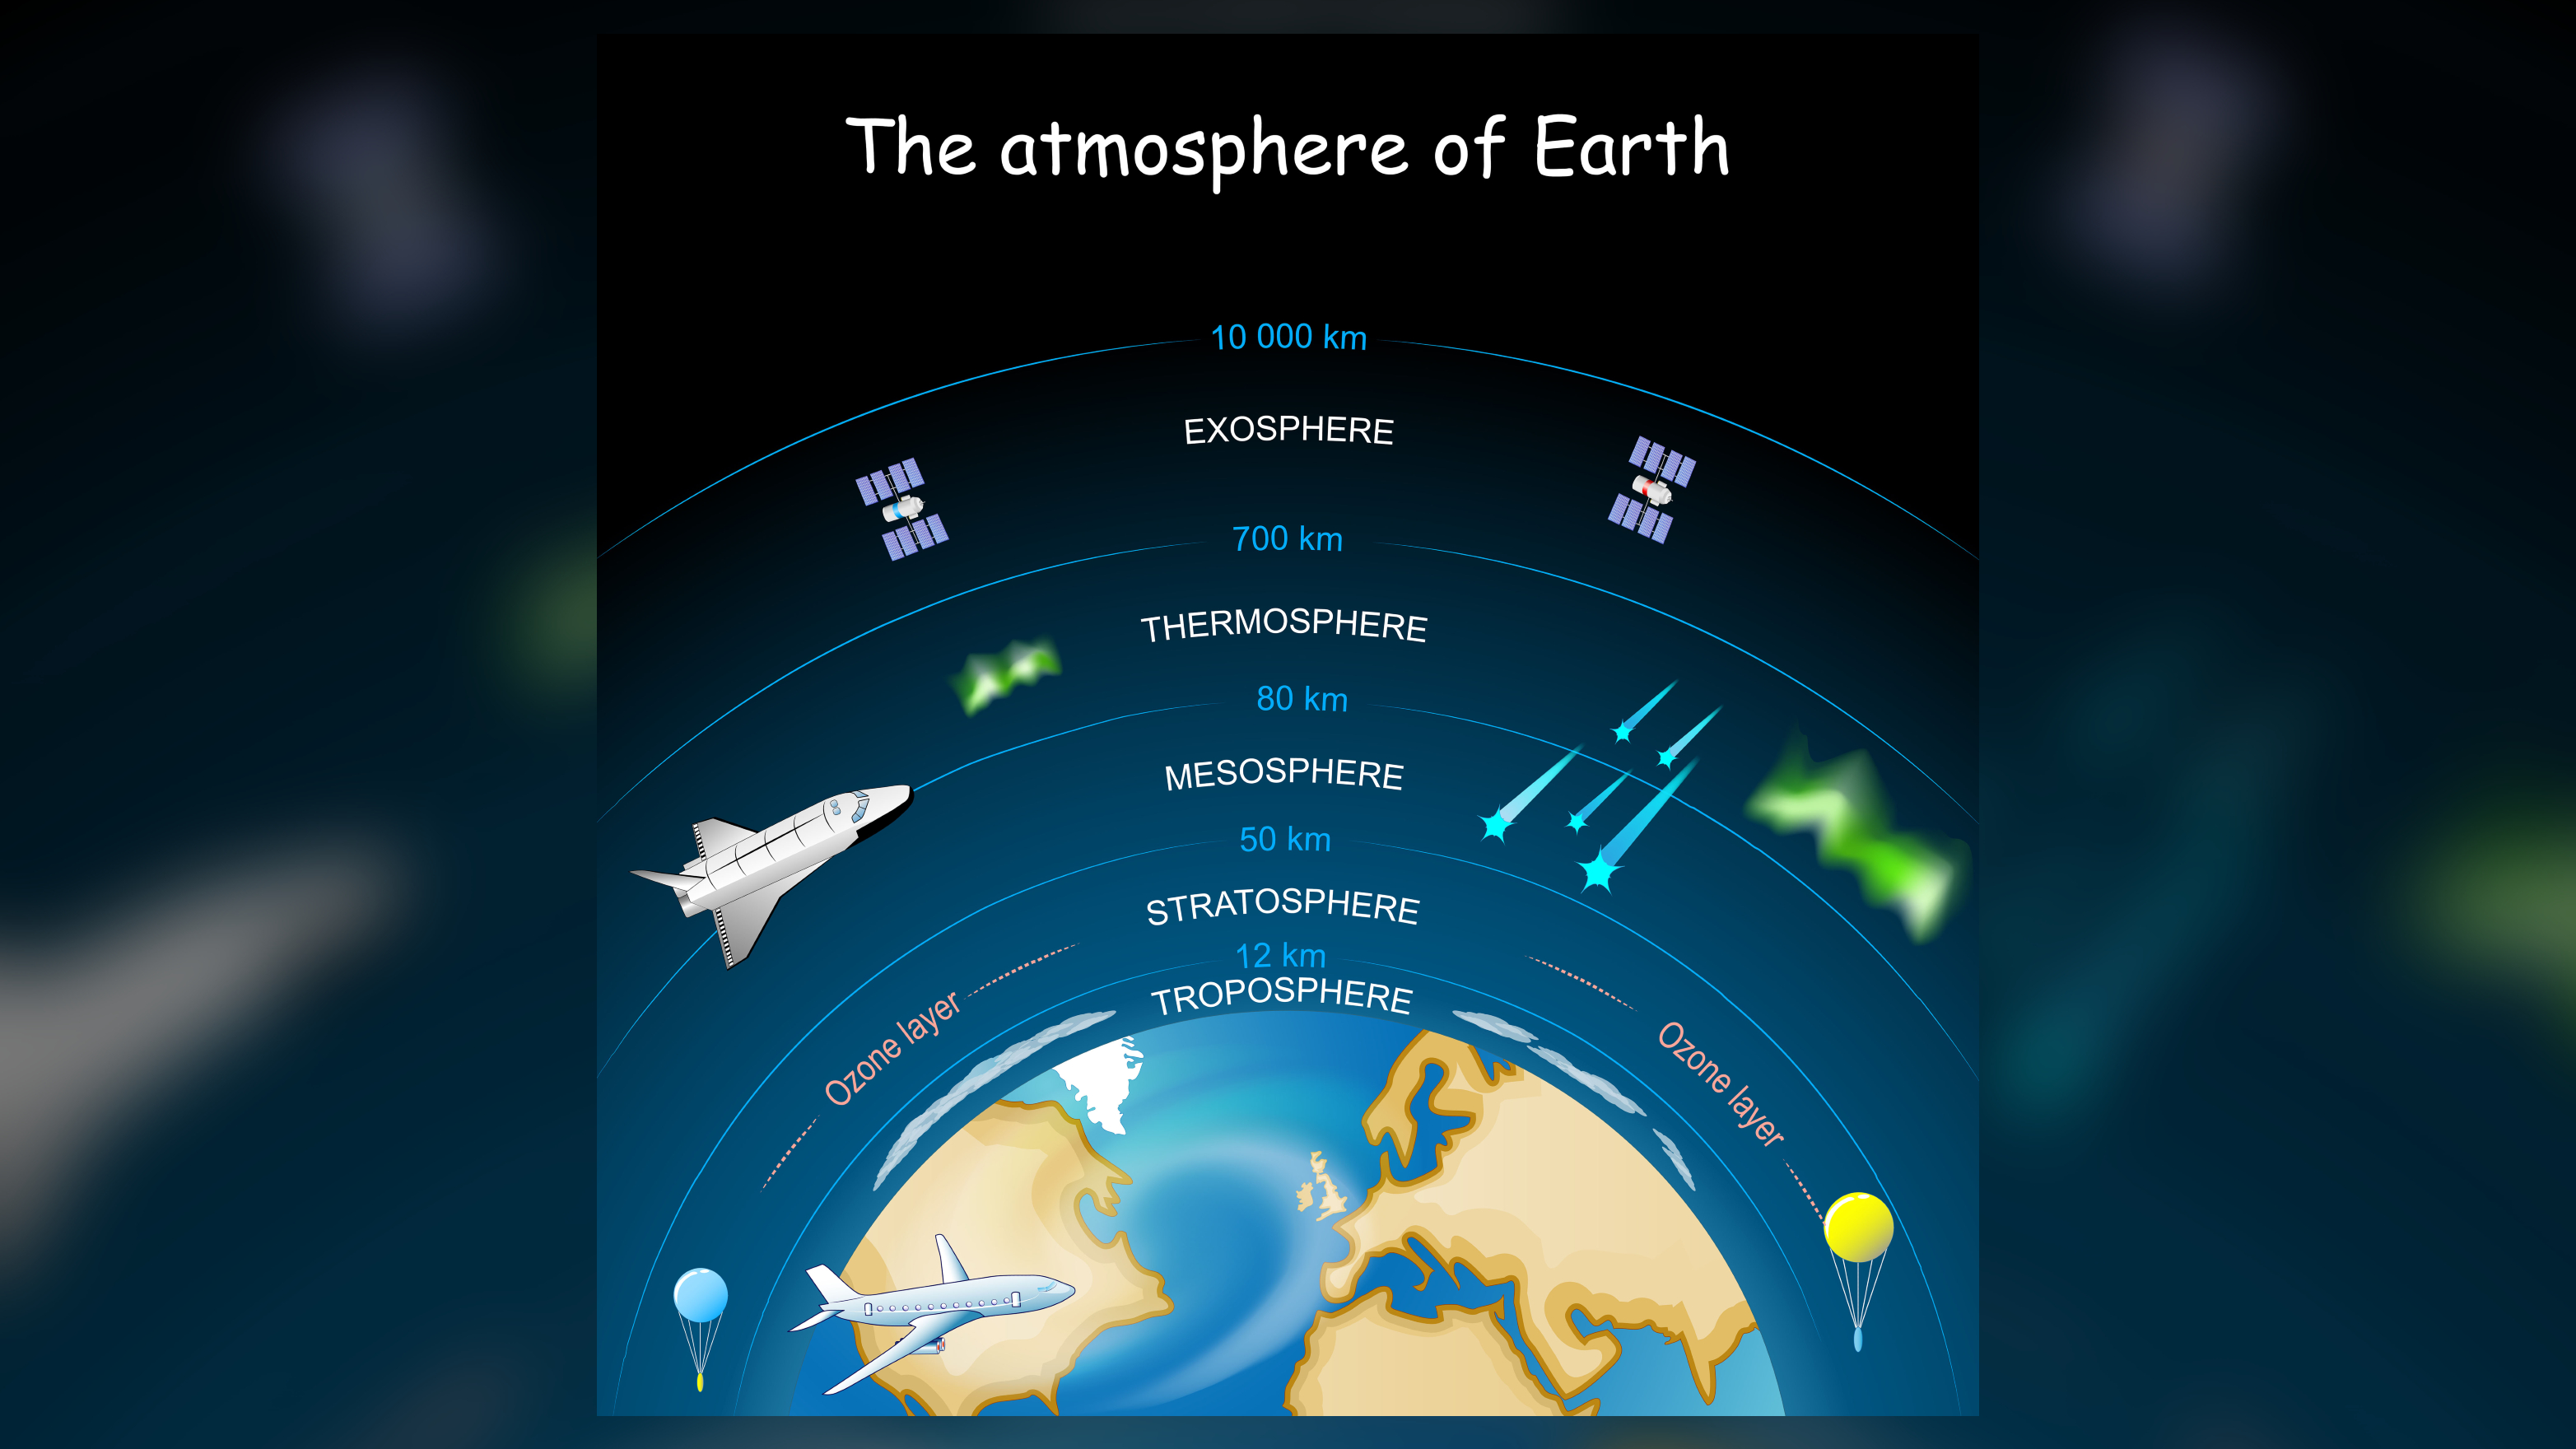 An illustration of the layers of Earth's atmosphere